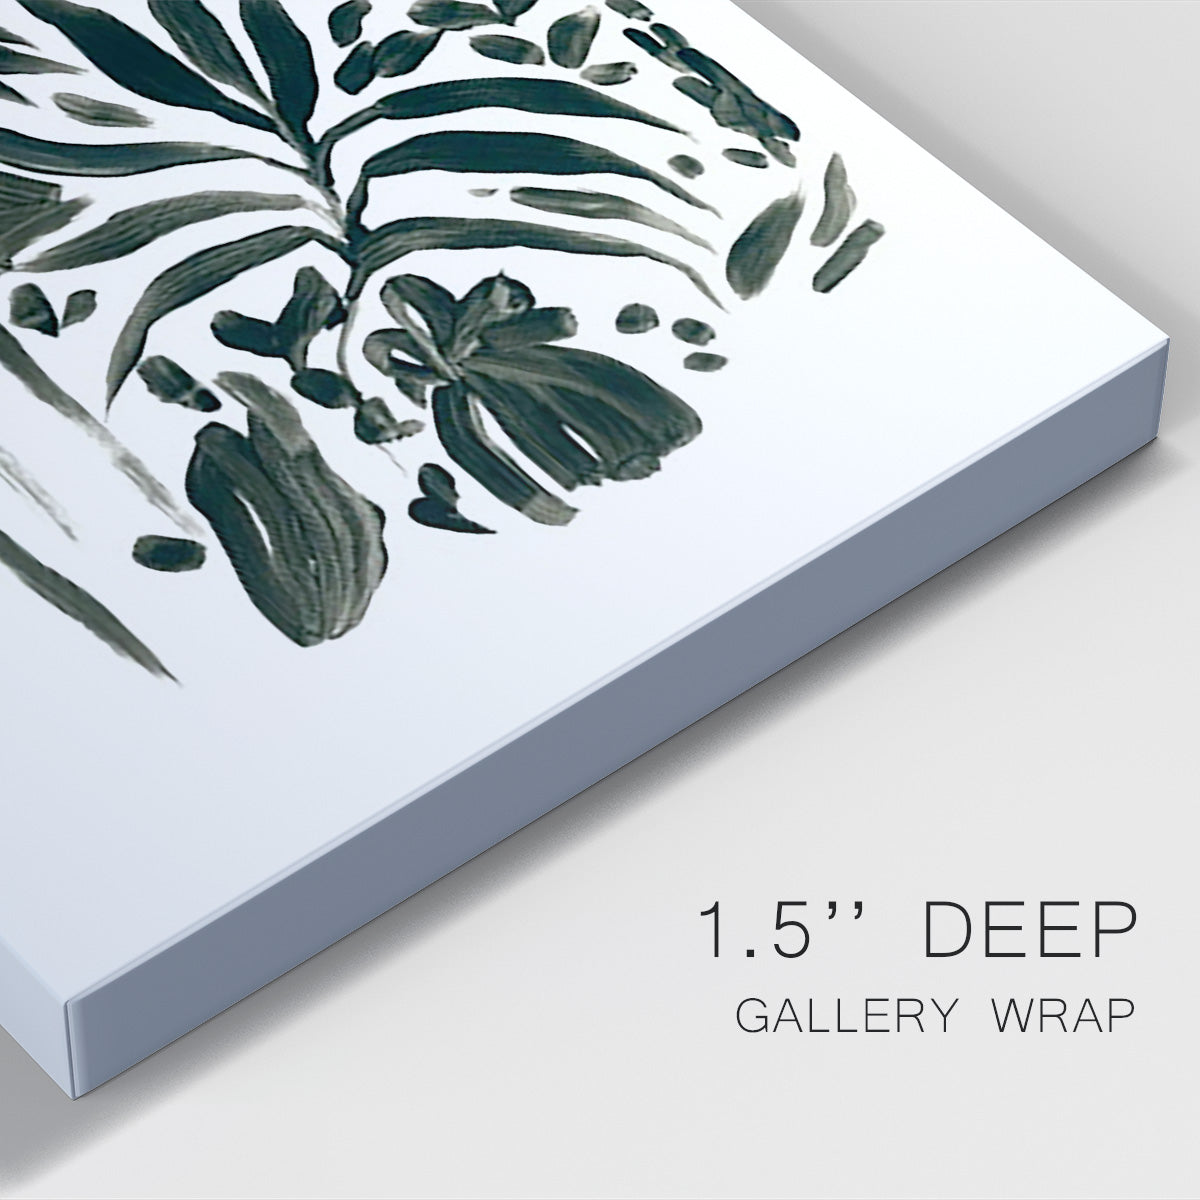 Ink Jungle II Premium Gallery Wrapped Canvas - Ready to Hang